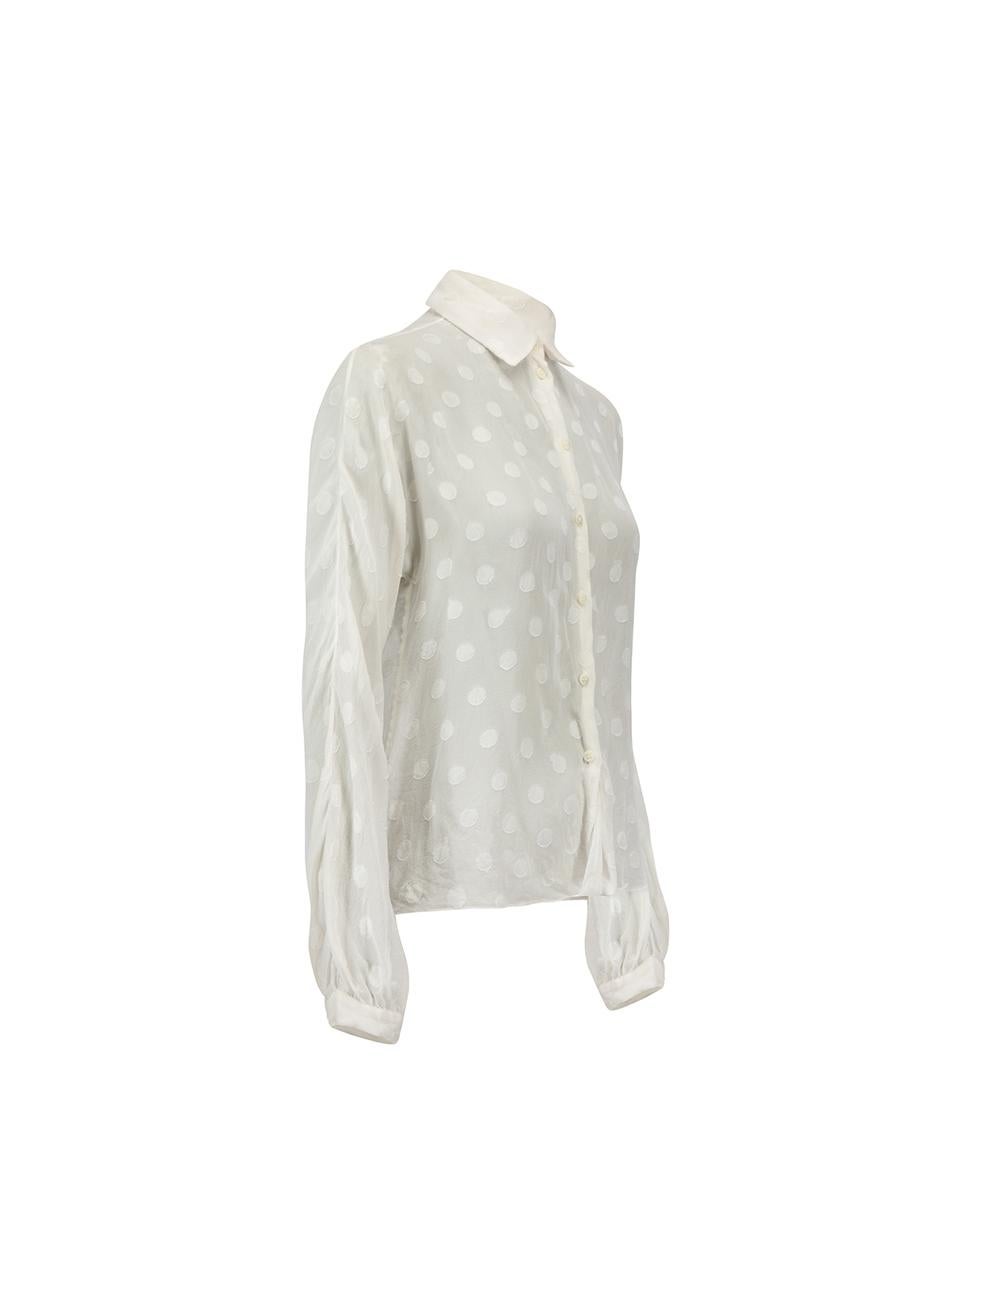 CONDITION is Very good. Minimal wear to blouse is evident. Minimal discolouration and slight loose threads along embroidered circles on this used Dolce & Gabbana designer resale item.





Details


White

Silk

Blouse

Sheer

Polkadot pattern

Long